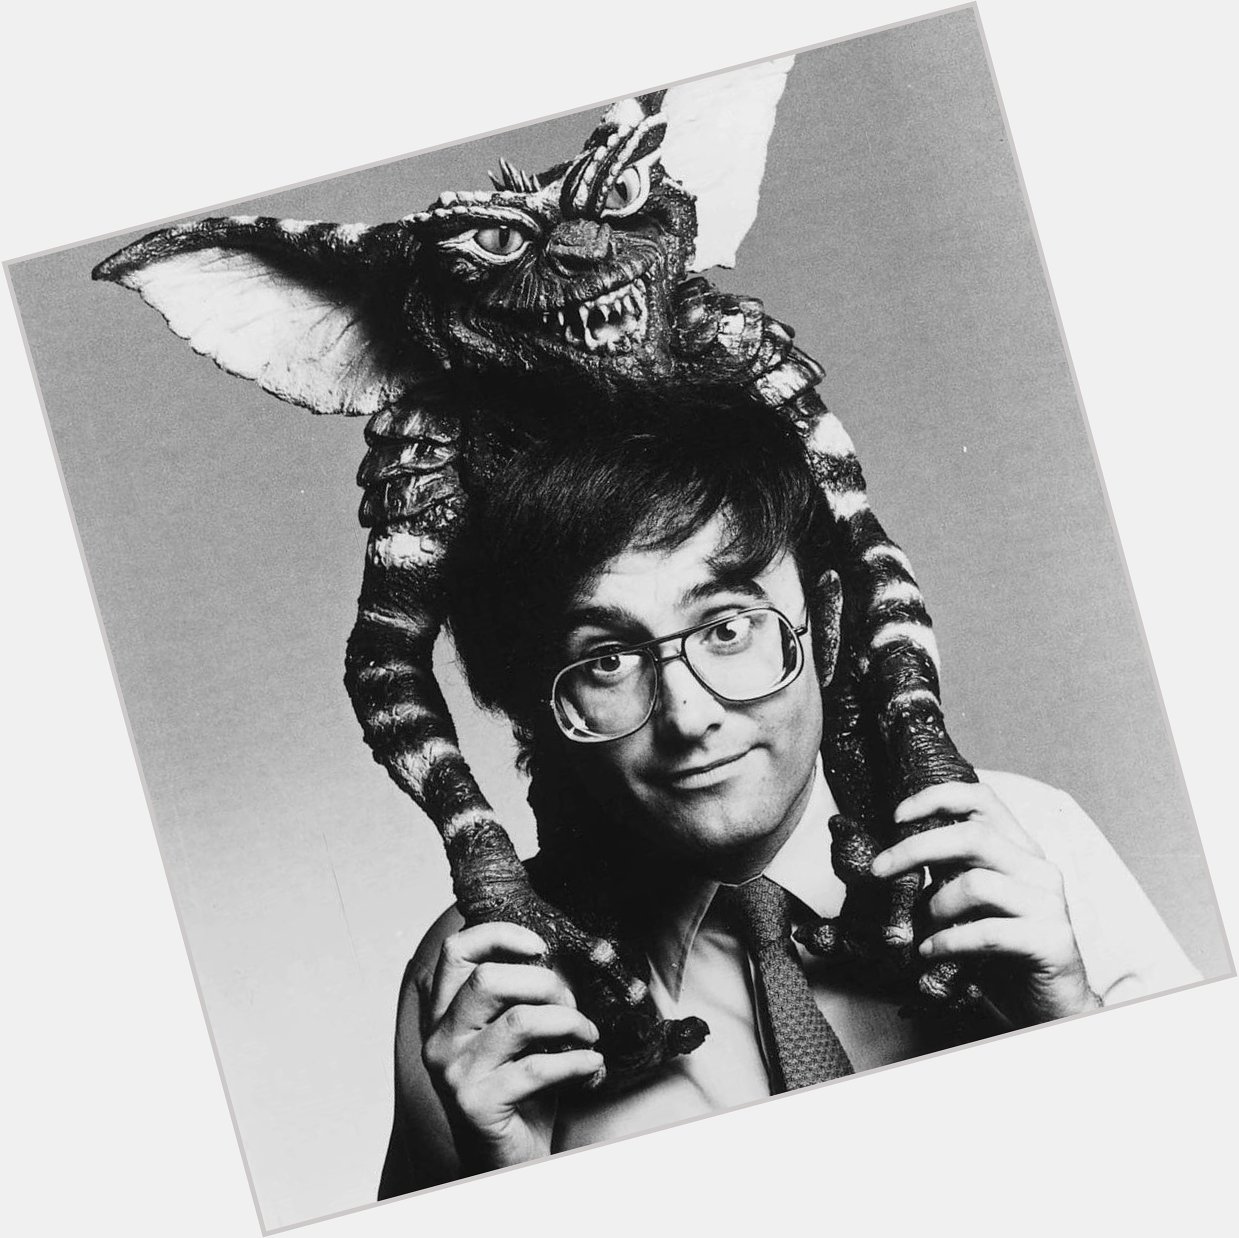 Wishing a happy birthday to Joe Dante! GREMLINS is coming to the New Bev in 35mm December 29th & 30th. 